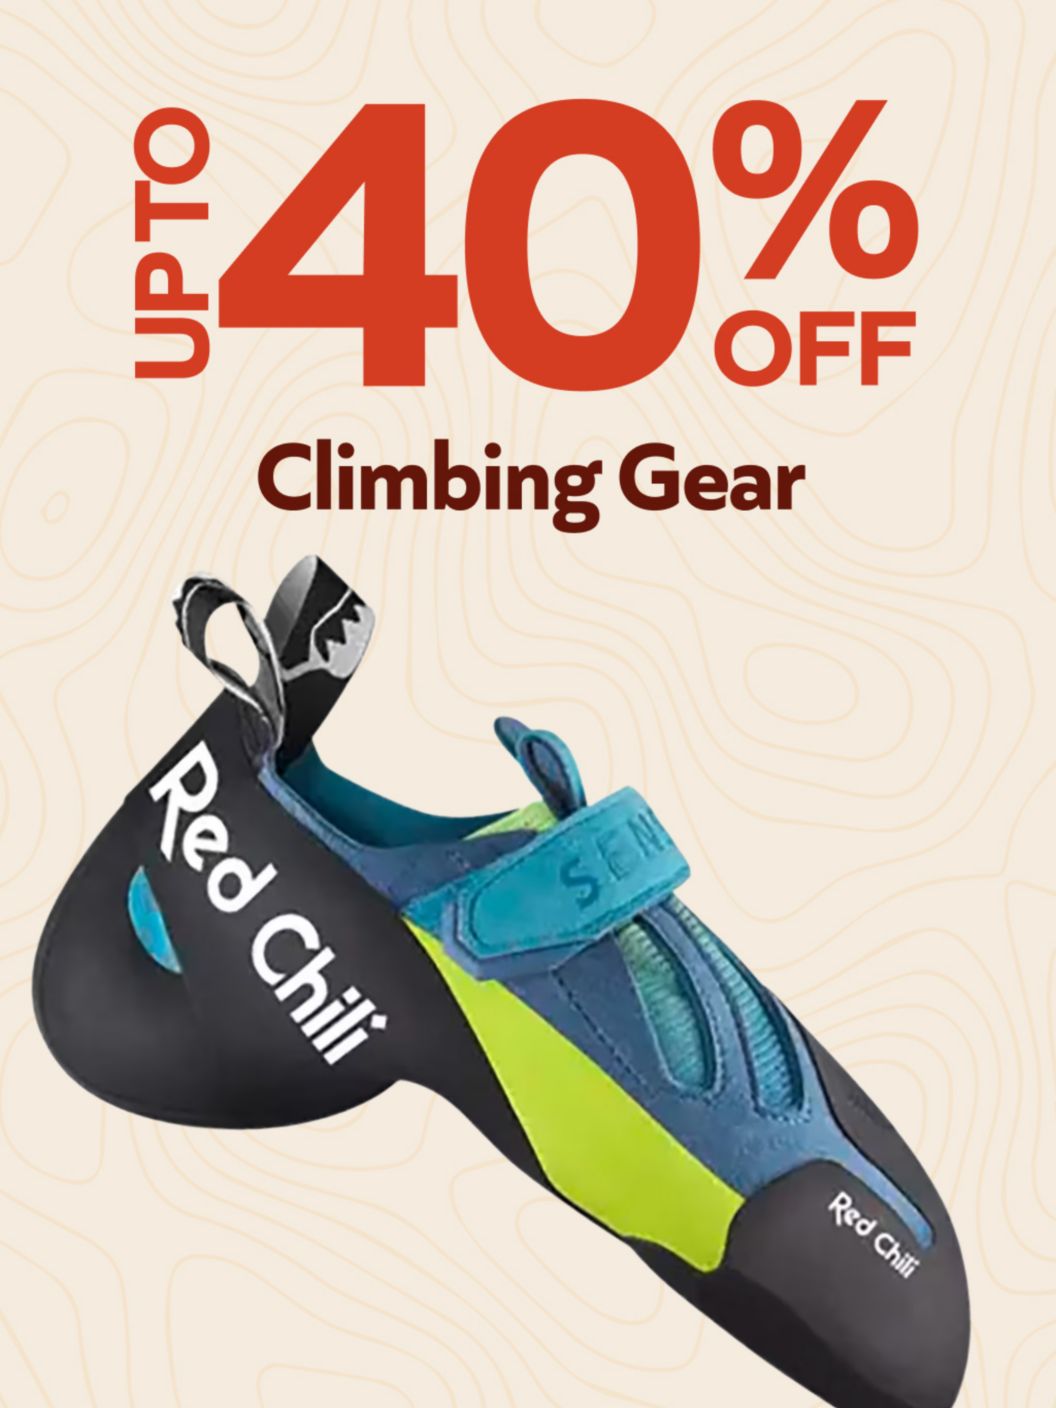 Climbing gear up to 40% off